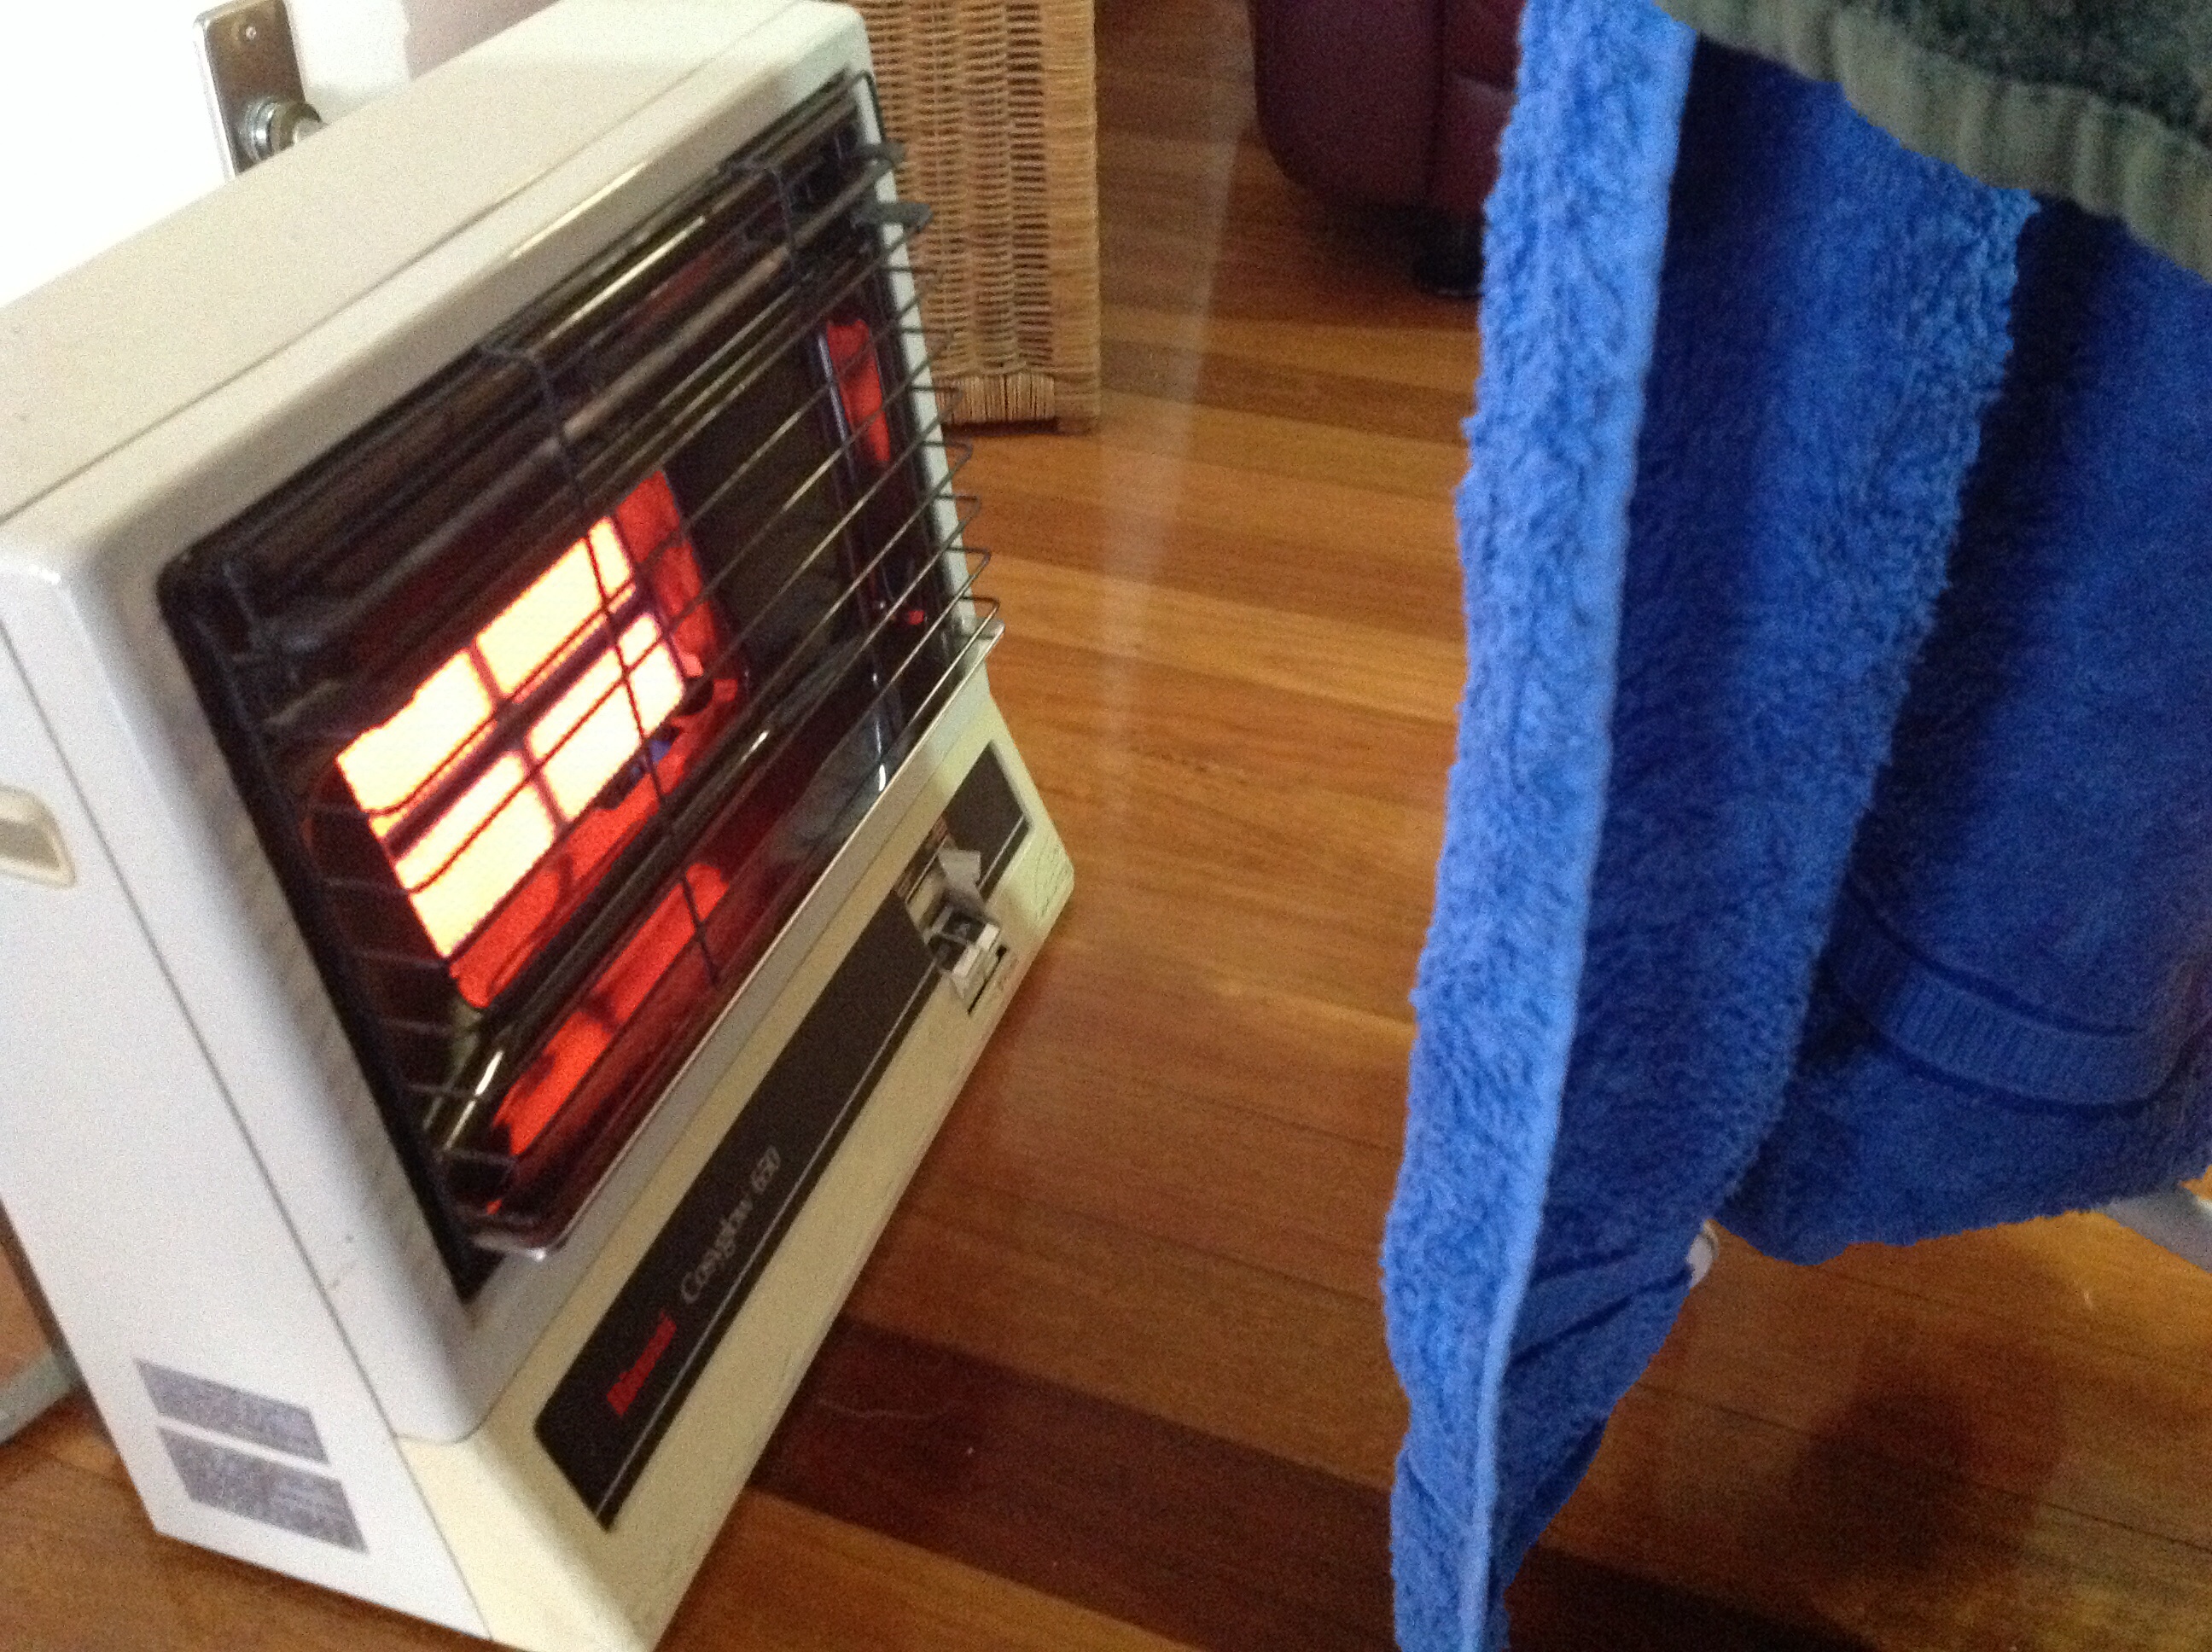 Always Safety First when drying laundry.  No children about.  Do NOT leave open fires untended.